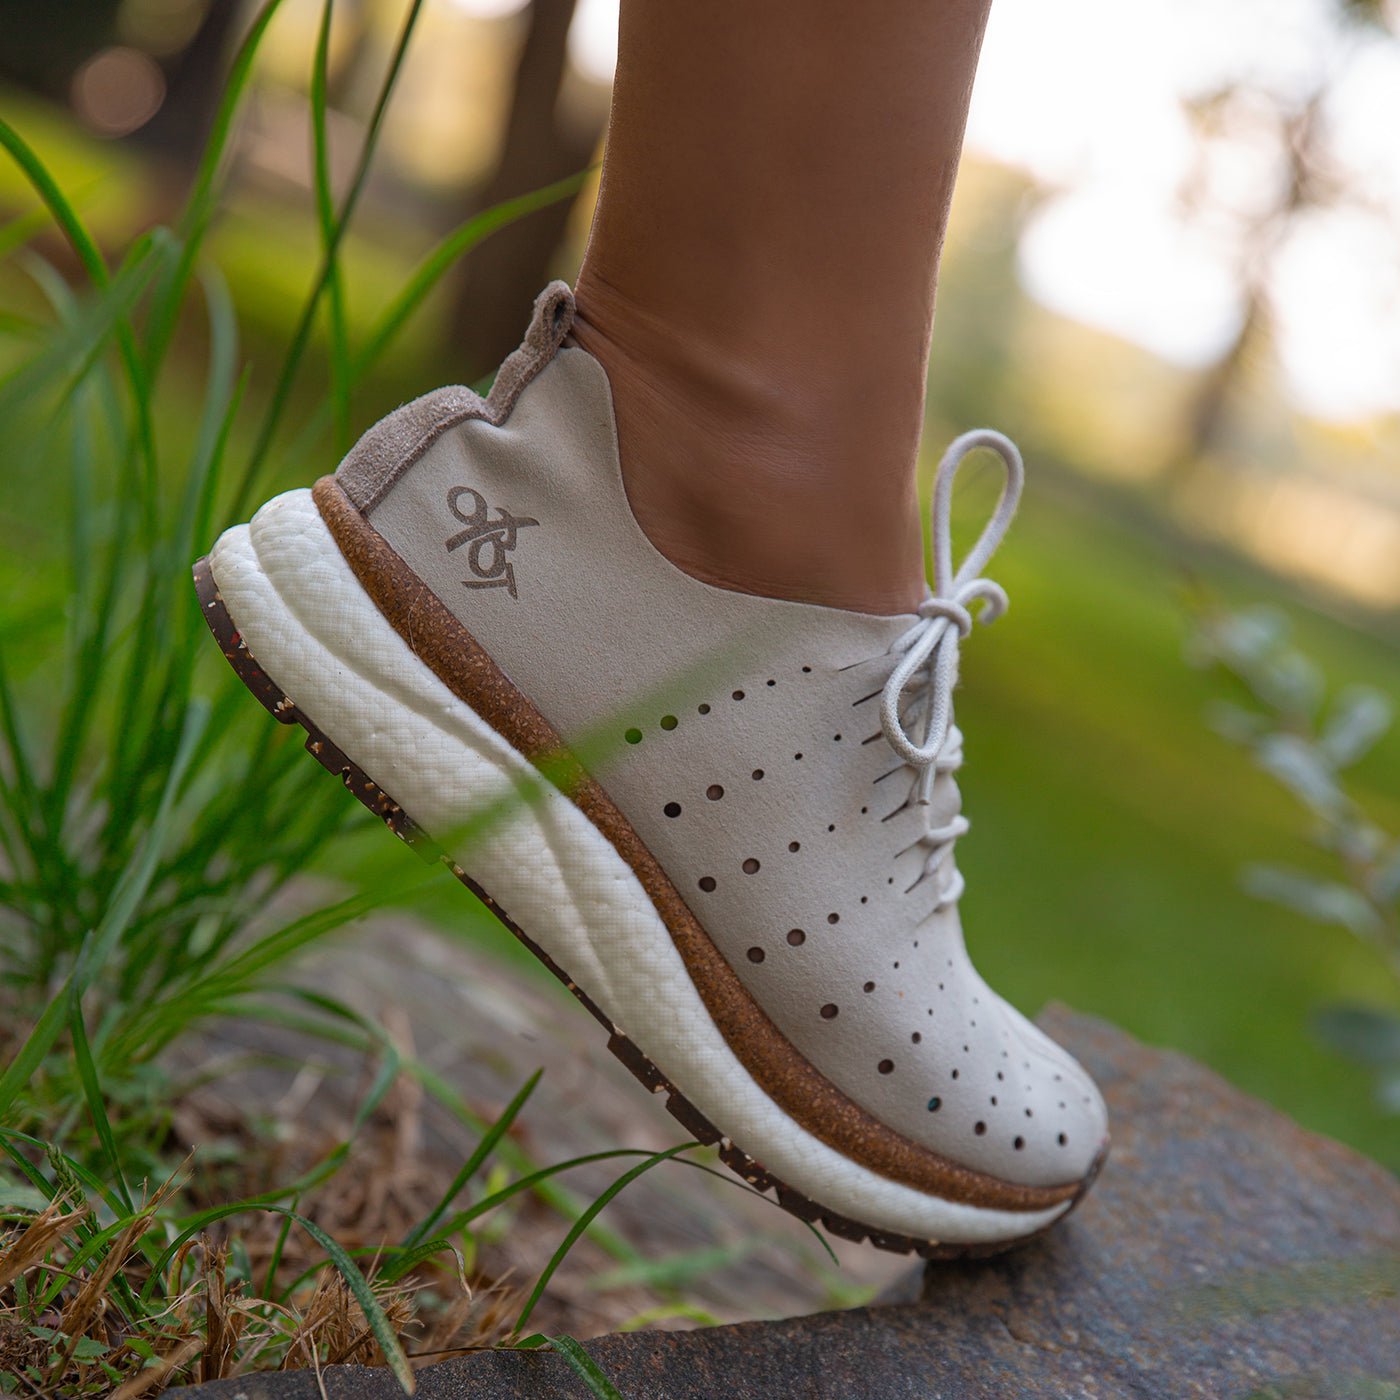 Comfortable and Stylish Walking Shoes for Travel for Women - Bobo